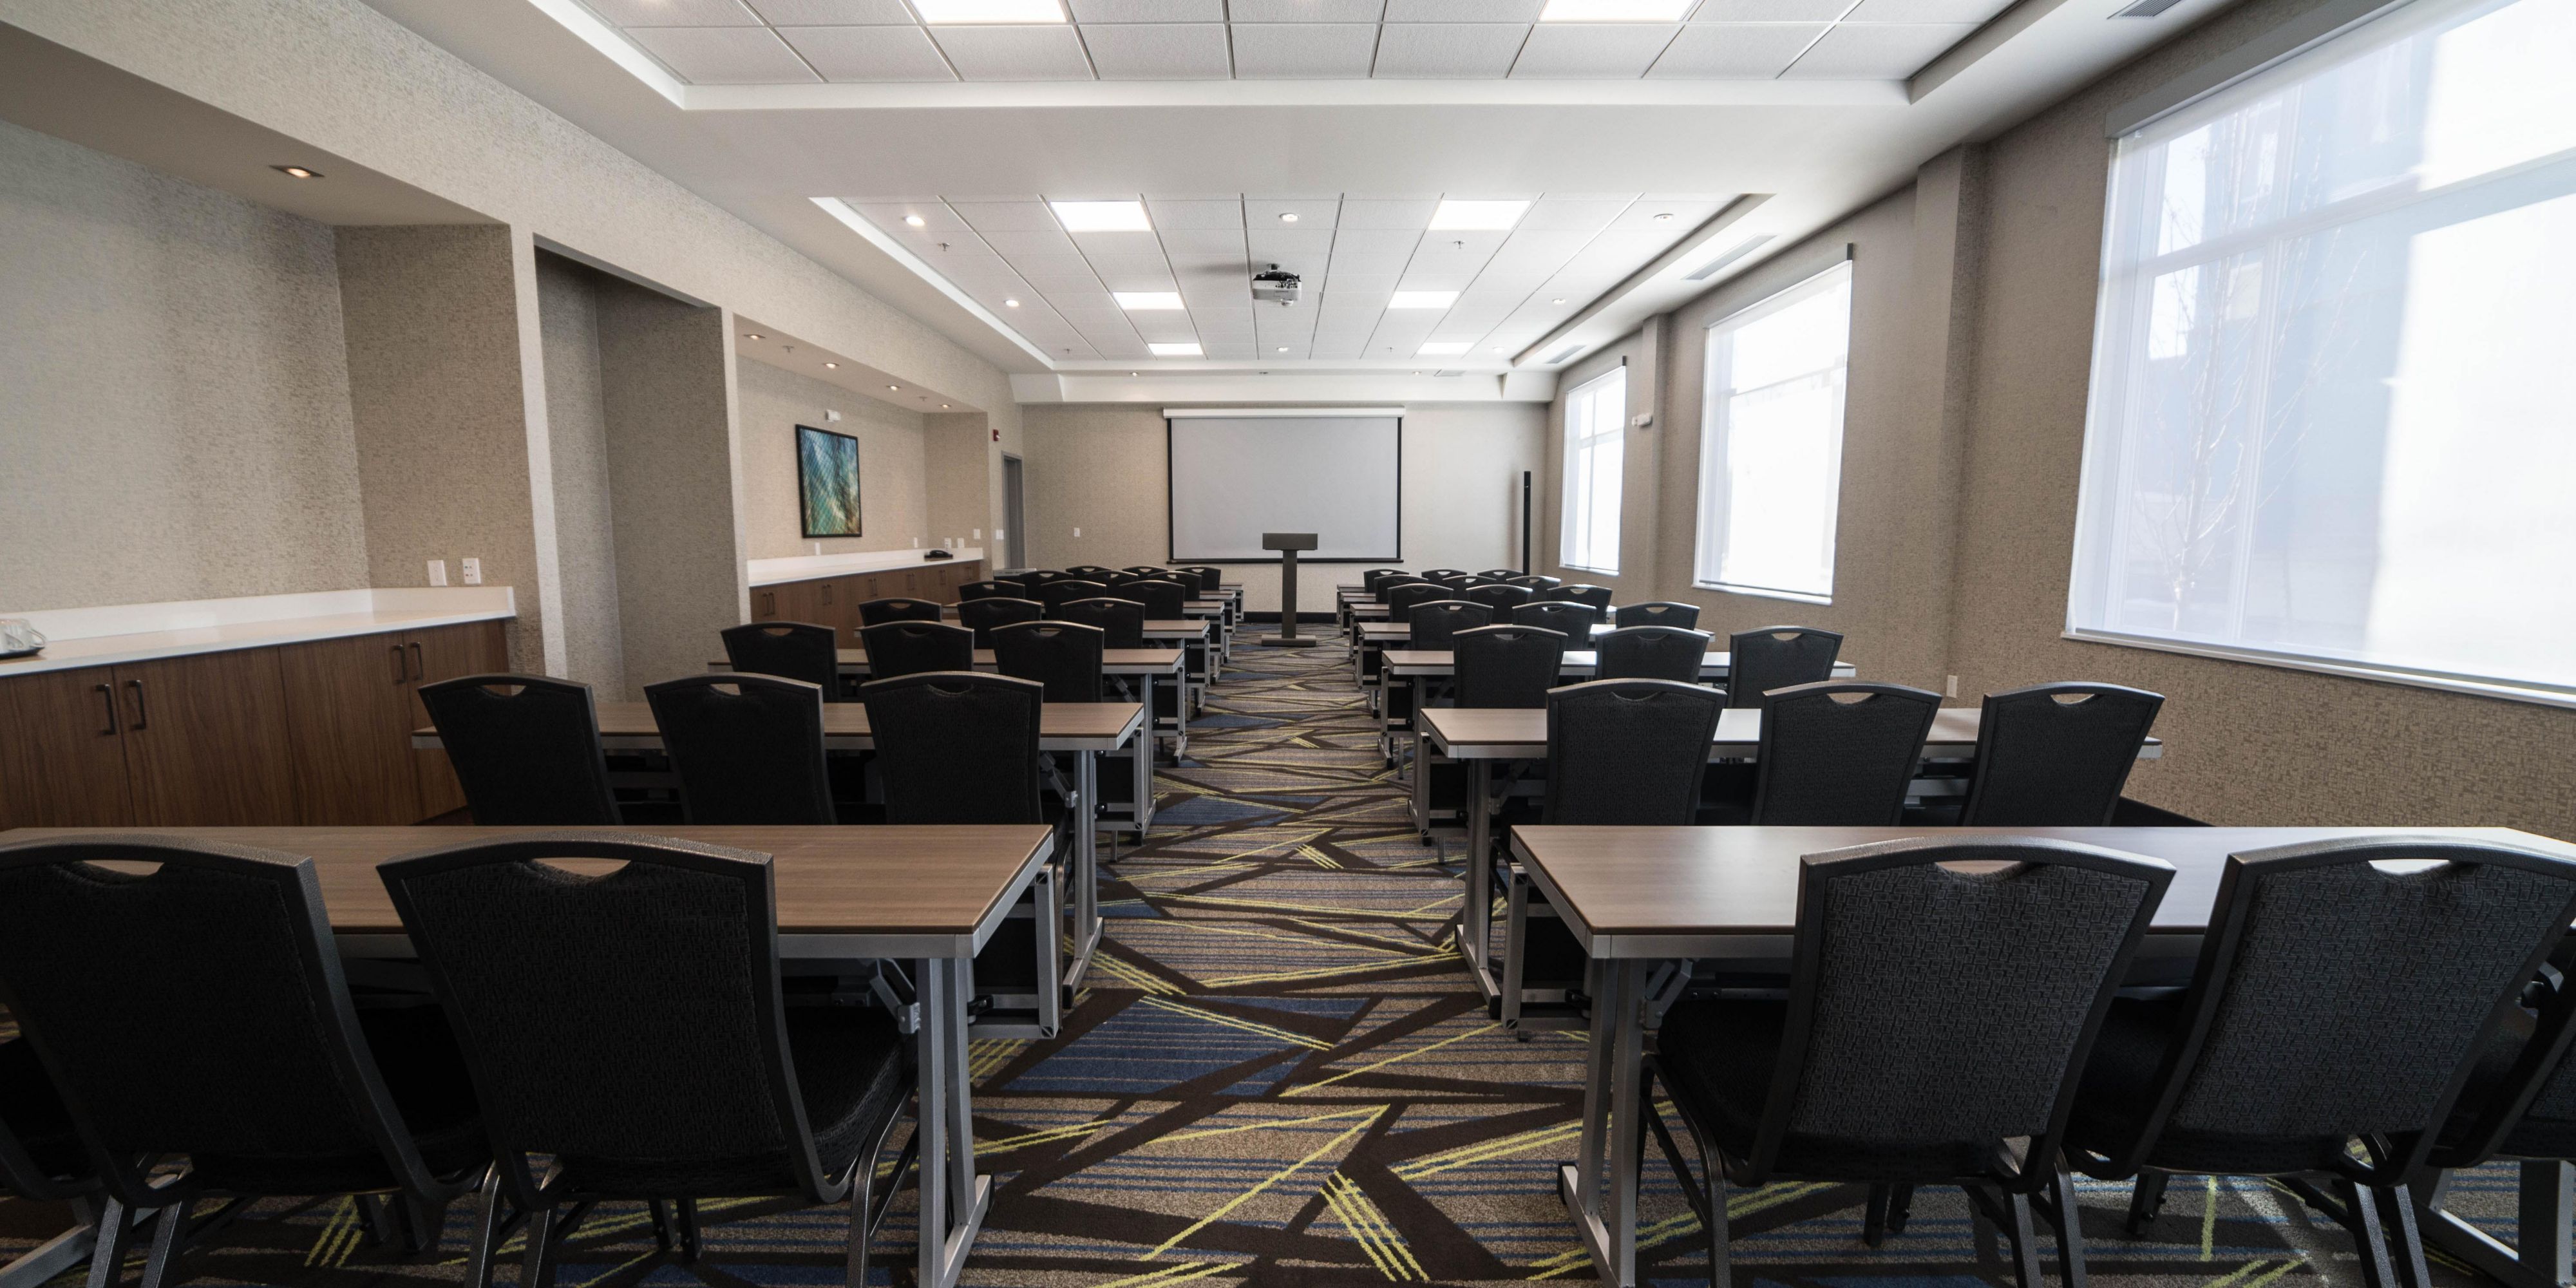 Inquire about our Meeting and Event options. Flexible space and catering options are available. 